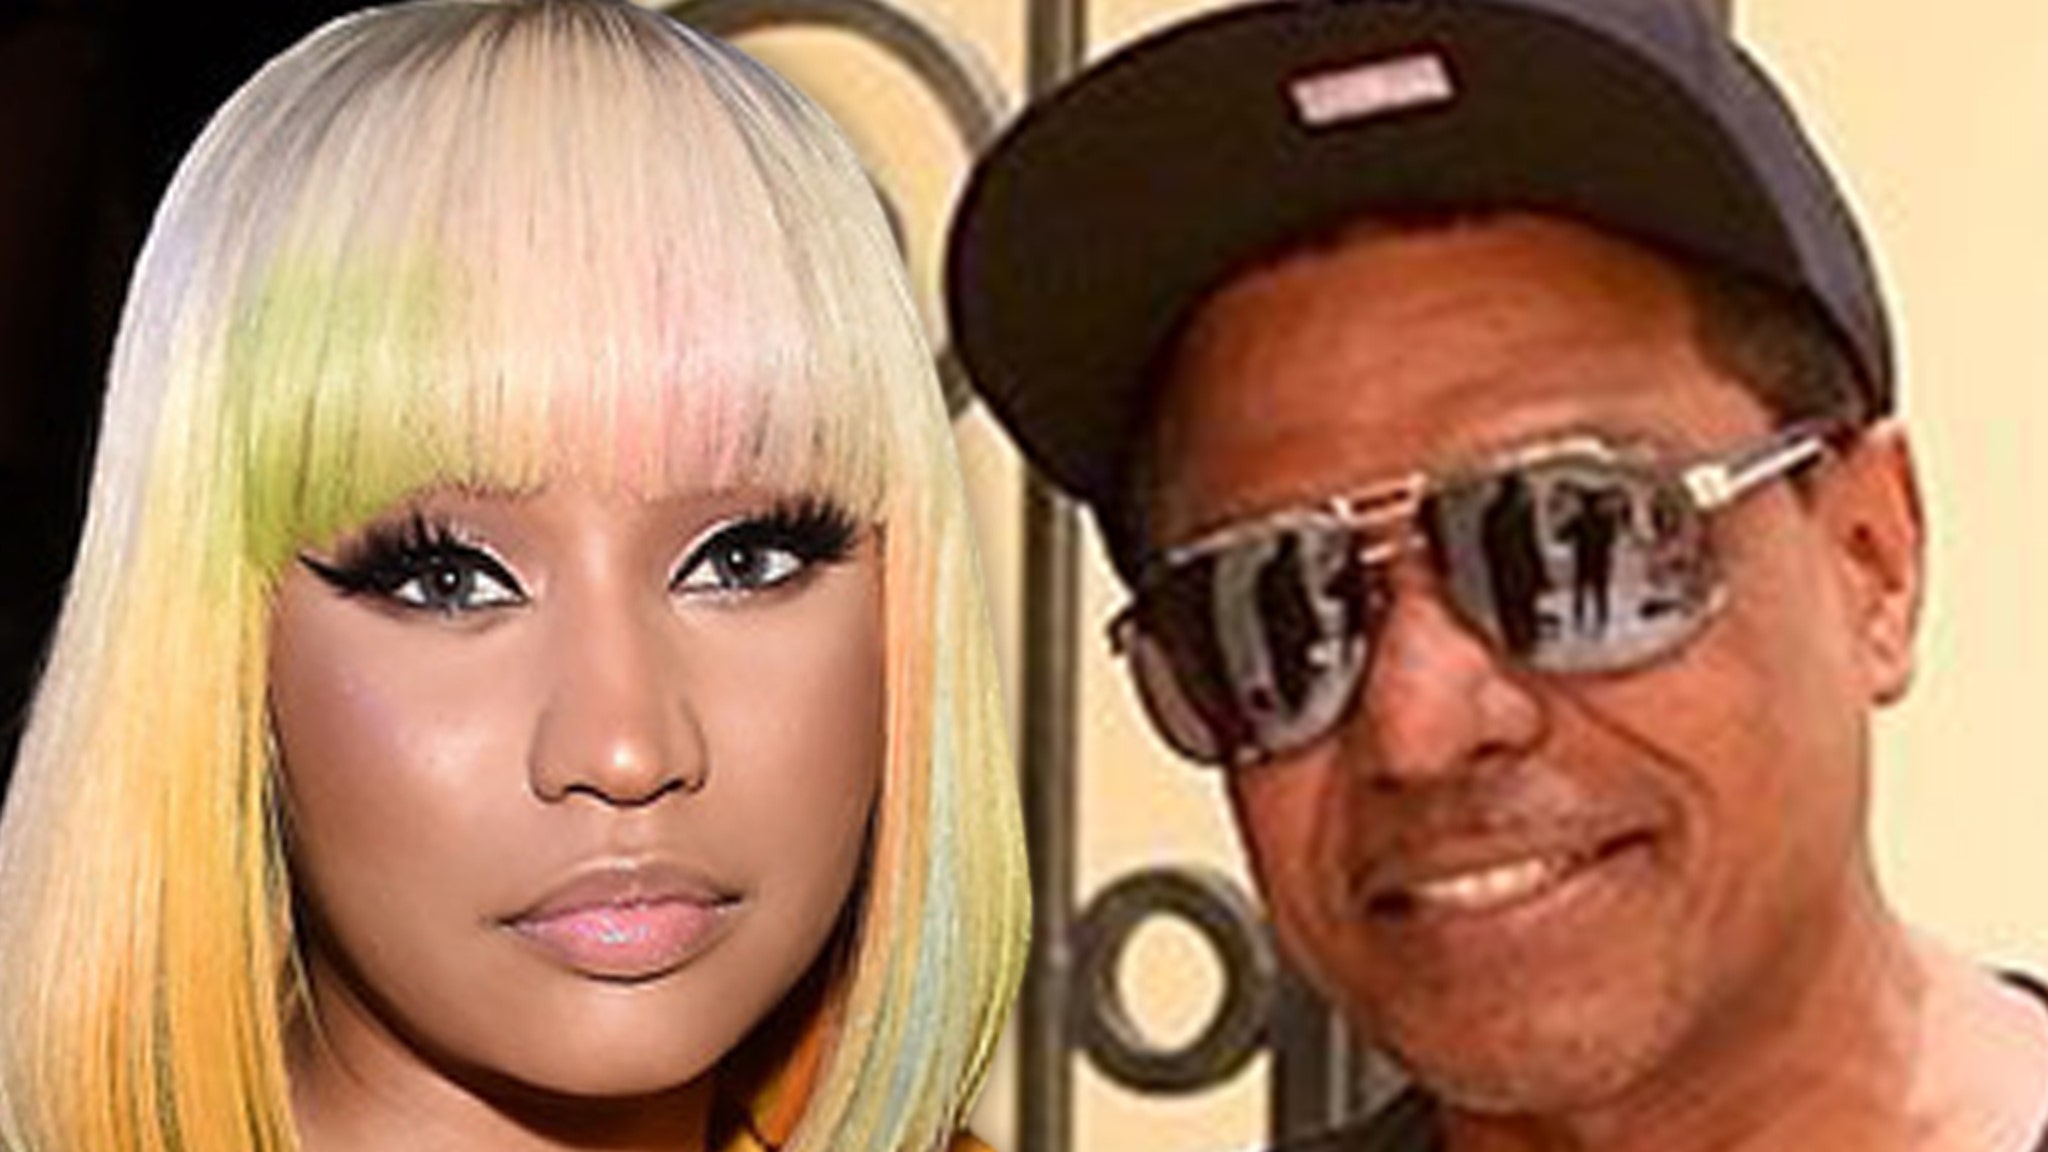 Driver in Nicki Minaj’s father’s deadly hit-and-run surrender to police